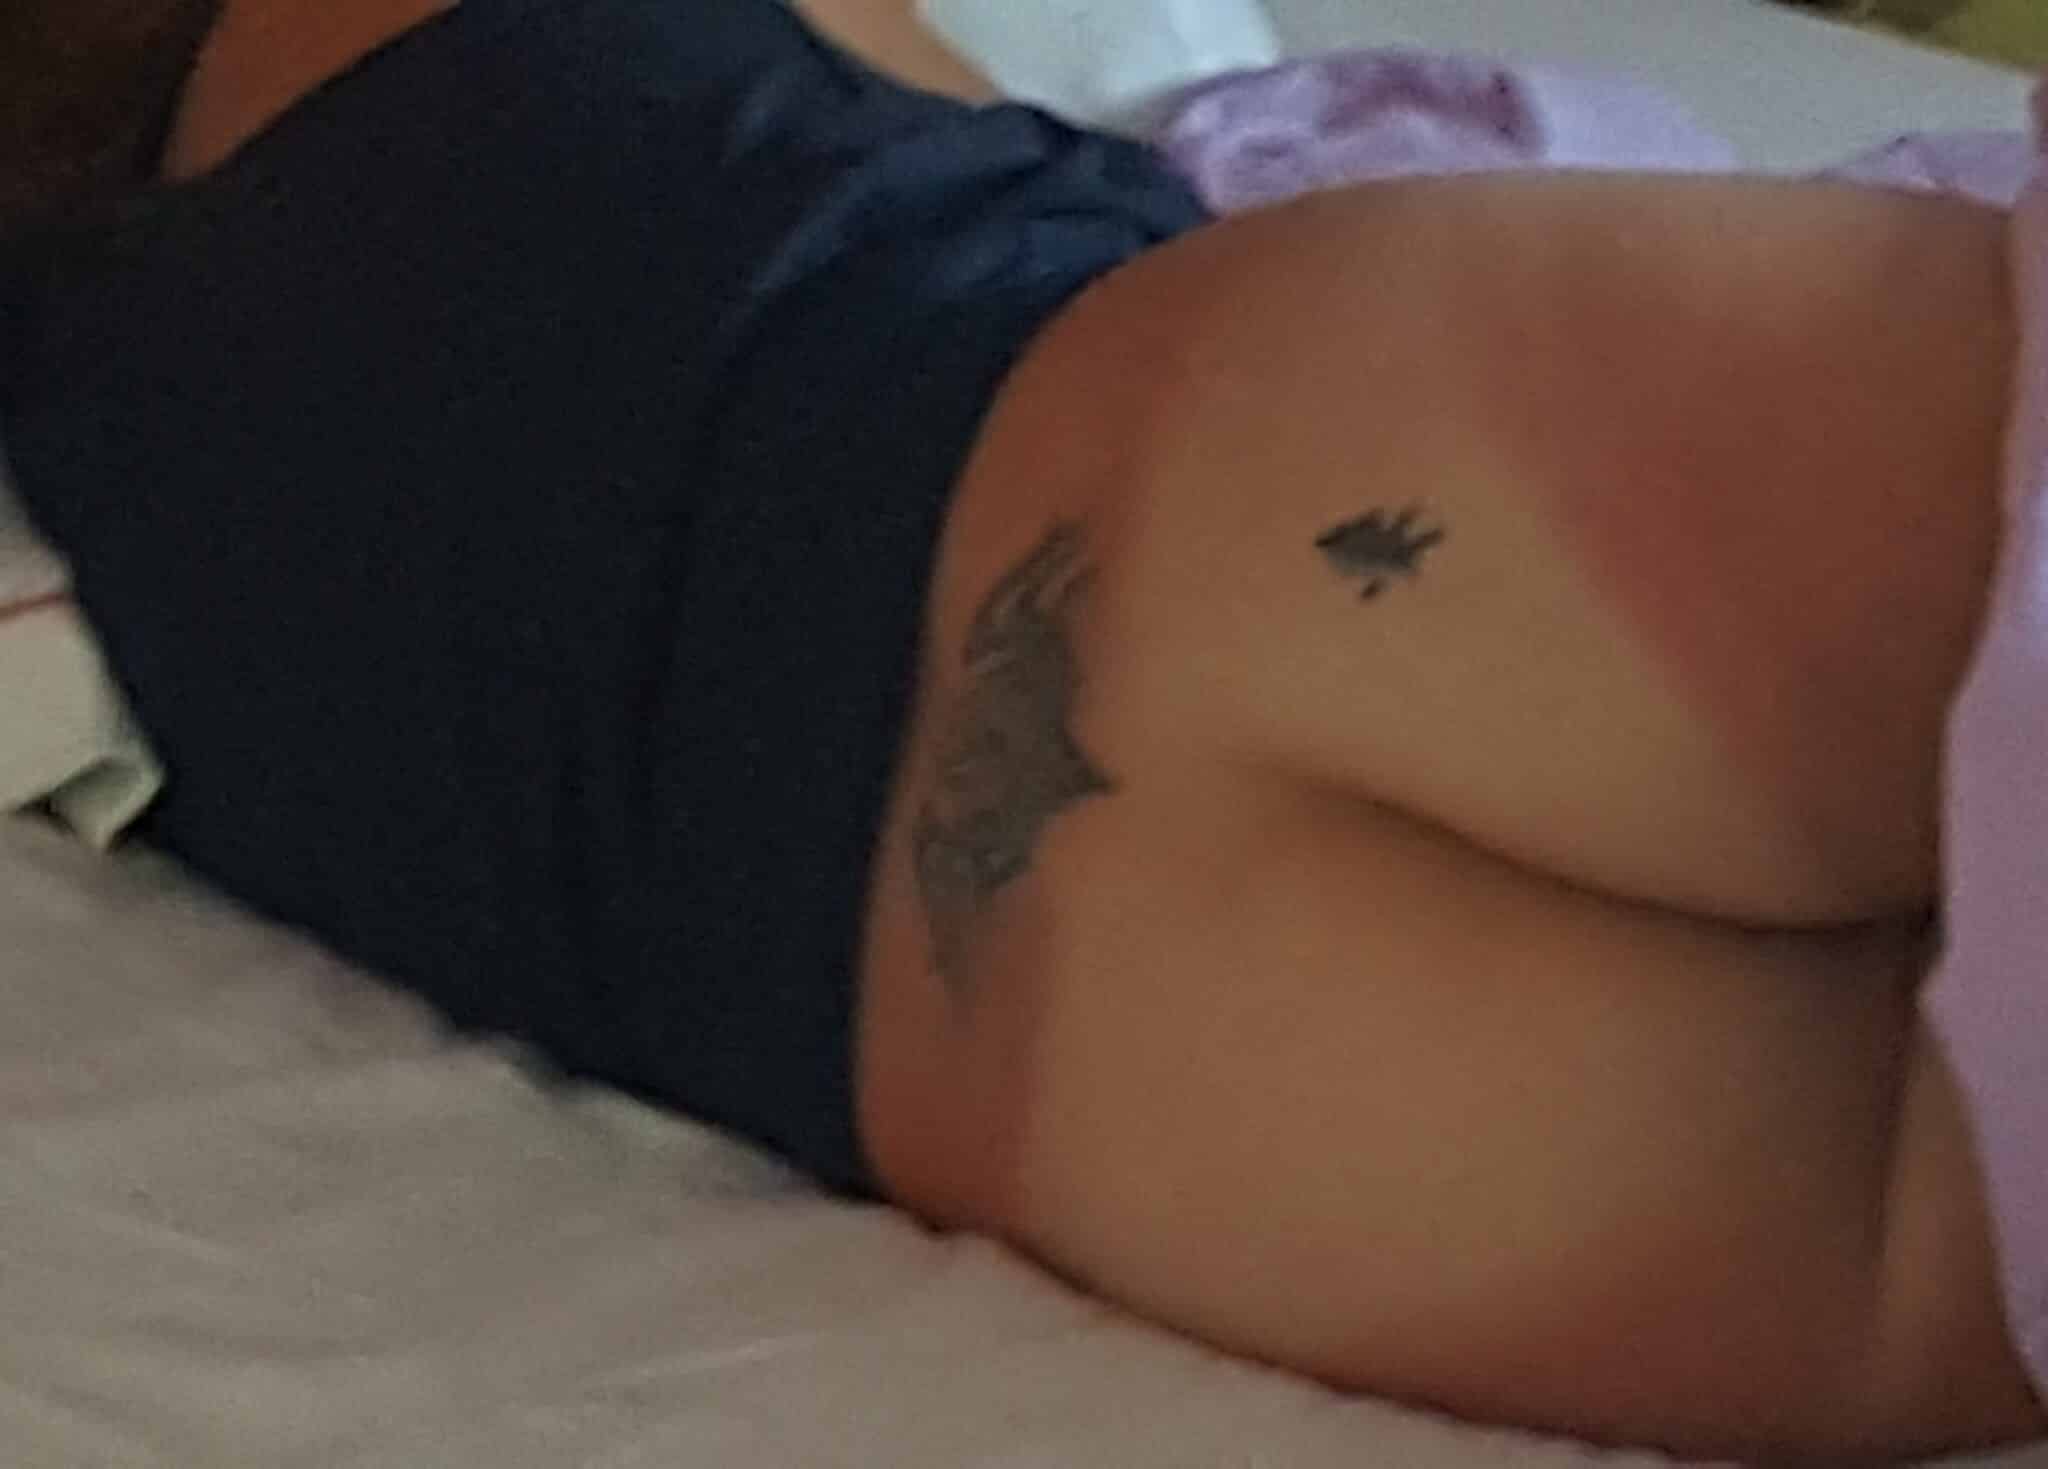 Tramp stamp Ass Flash Pics, MILF Flashing Pics, No Panties Pics, Real Amateurs from Google, Tumblr, Pinterest, Facebook, Twitter, Instagram and Snapchat. pic